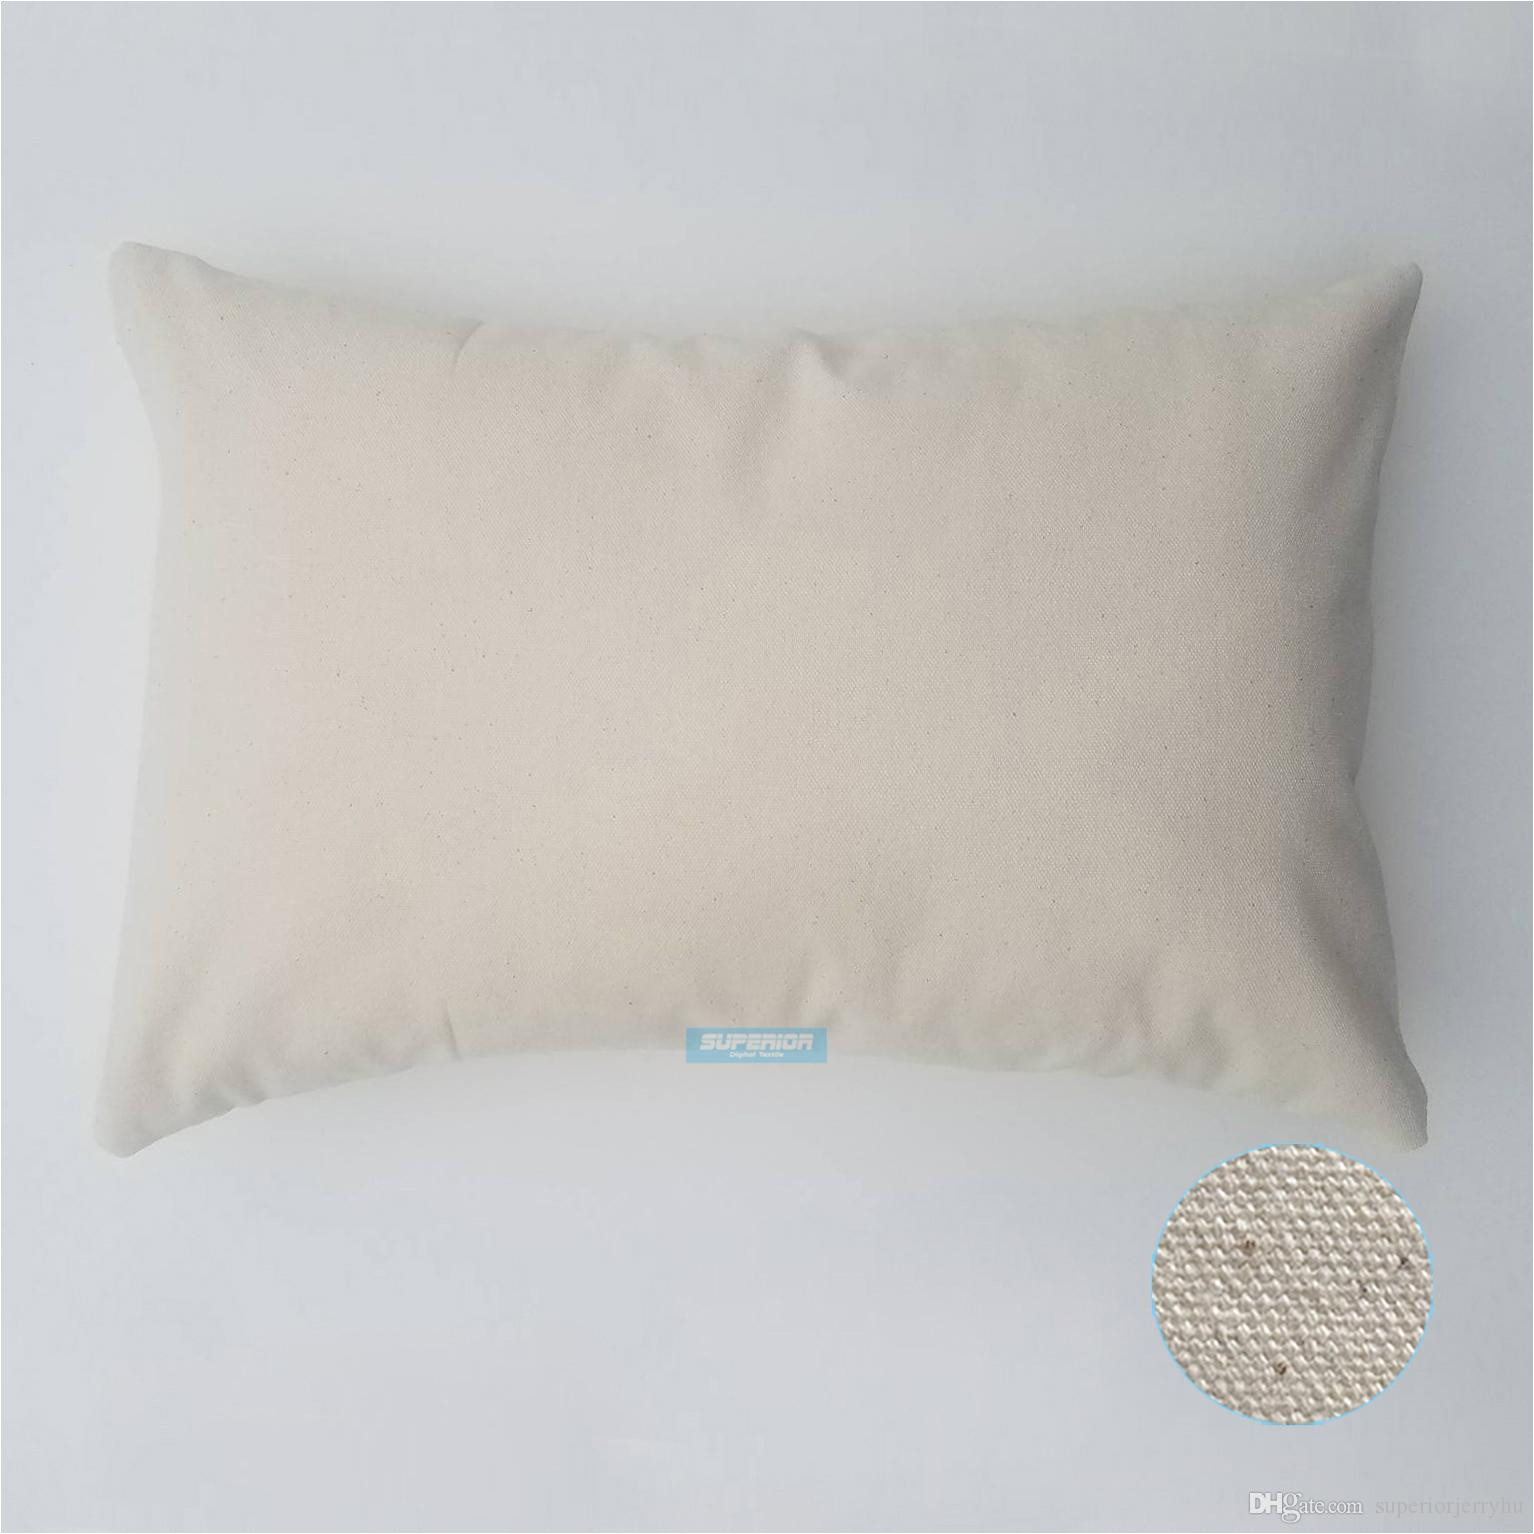 Blank Canvas Pillow Covers wholesale Canada 12×18 Inches wholesale 8oz White or Natural Cotton Canvas Pillow